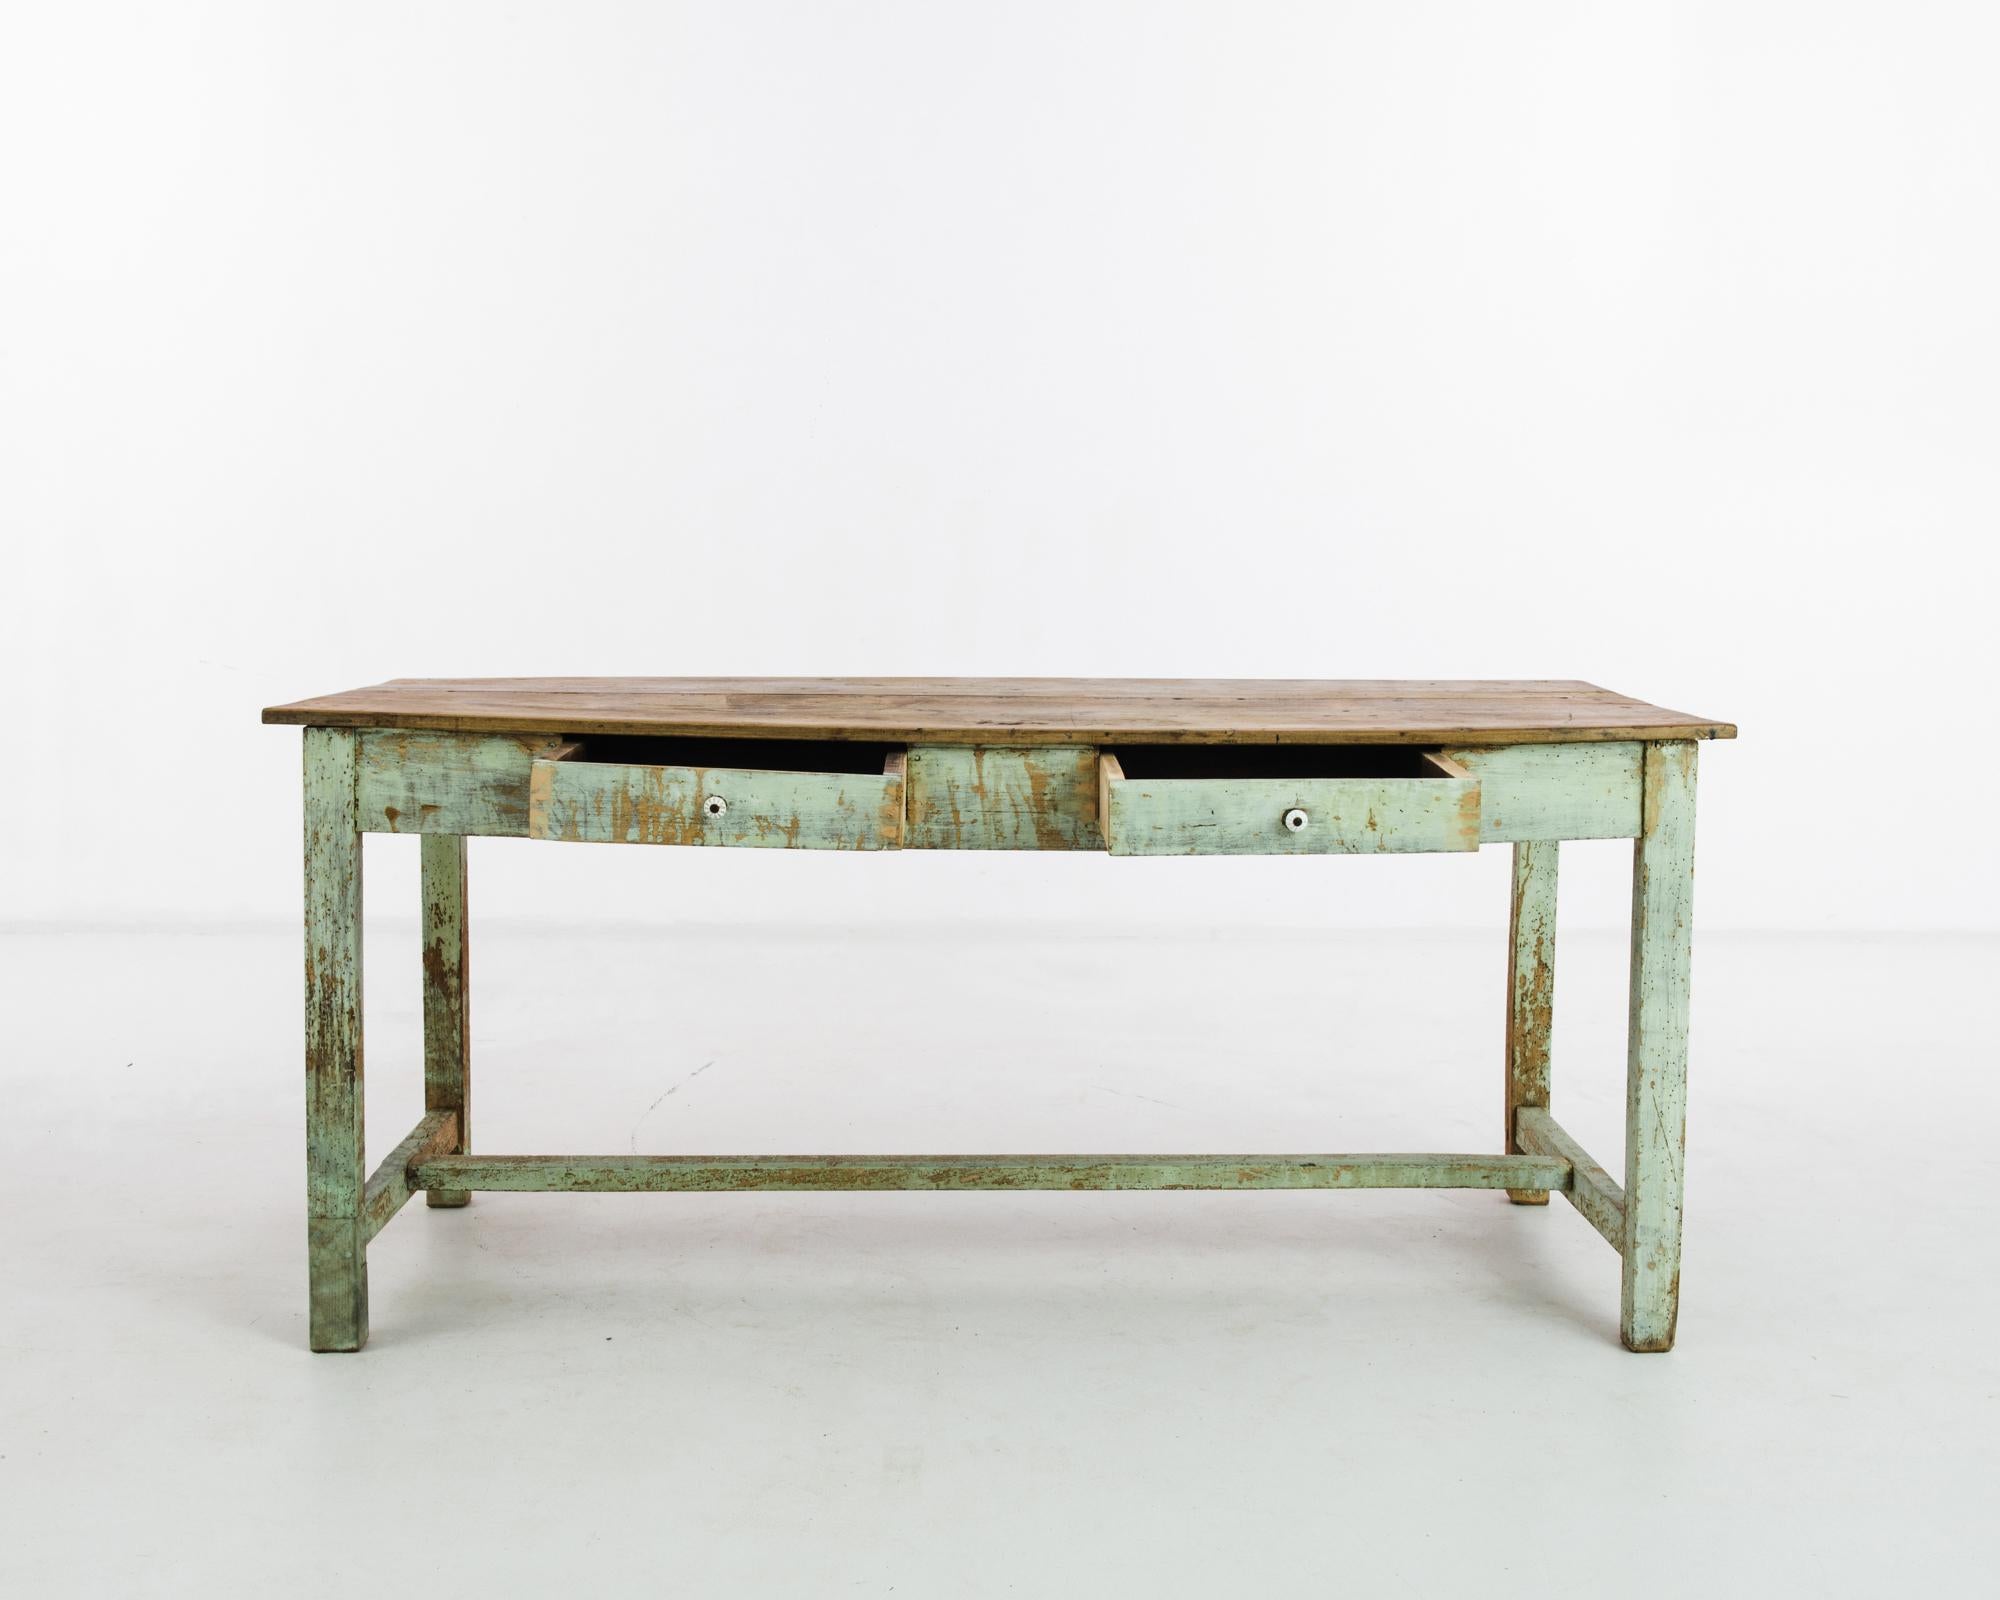 Embrace the vintage allure of this 1900s French wood patinated table, a testament to timeless craftsmanship and character. This solid wood workshop table boasts an original green painted leg finish, adding a touch of rustic charm. The natural top